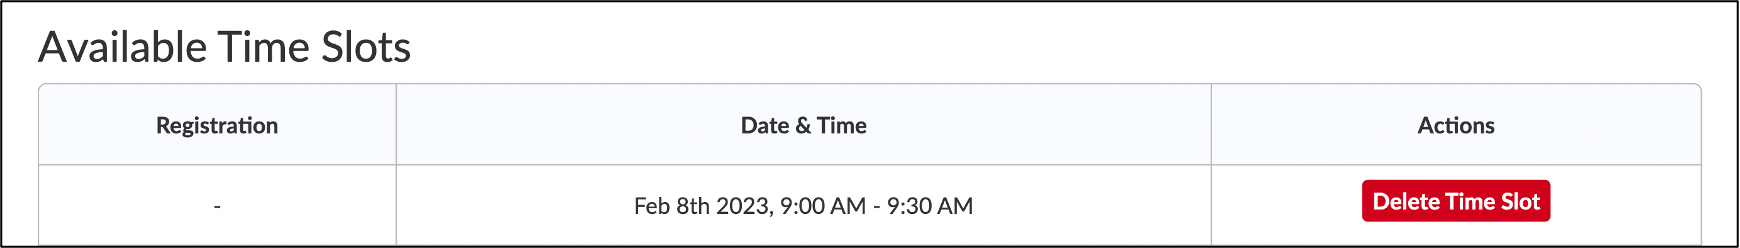 Screenshot of the "Available Time Slots" table in the Scheduler tool.